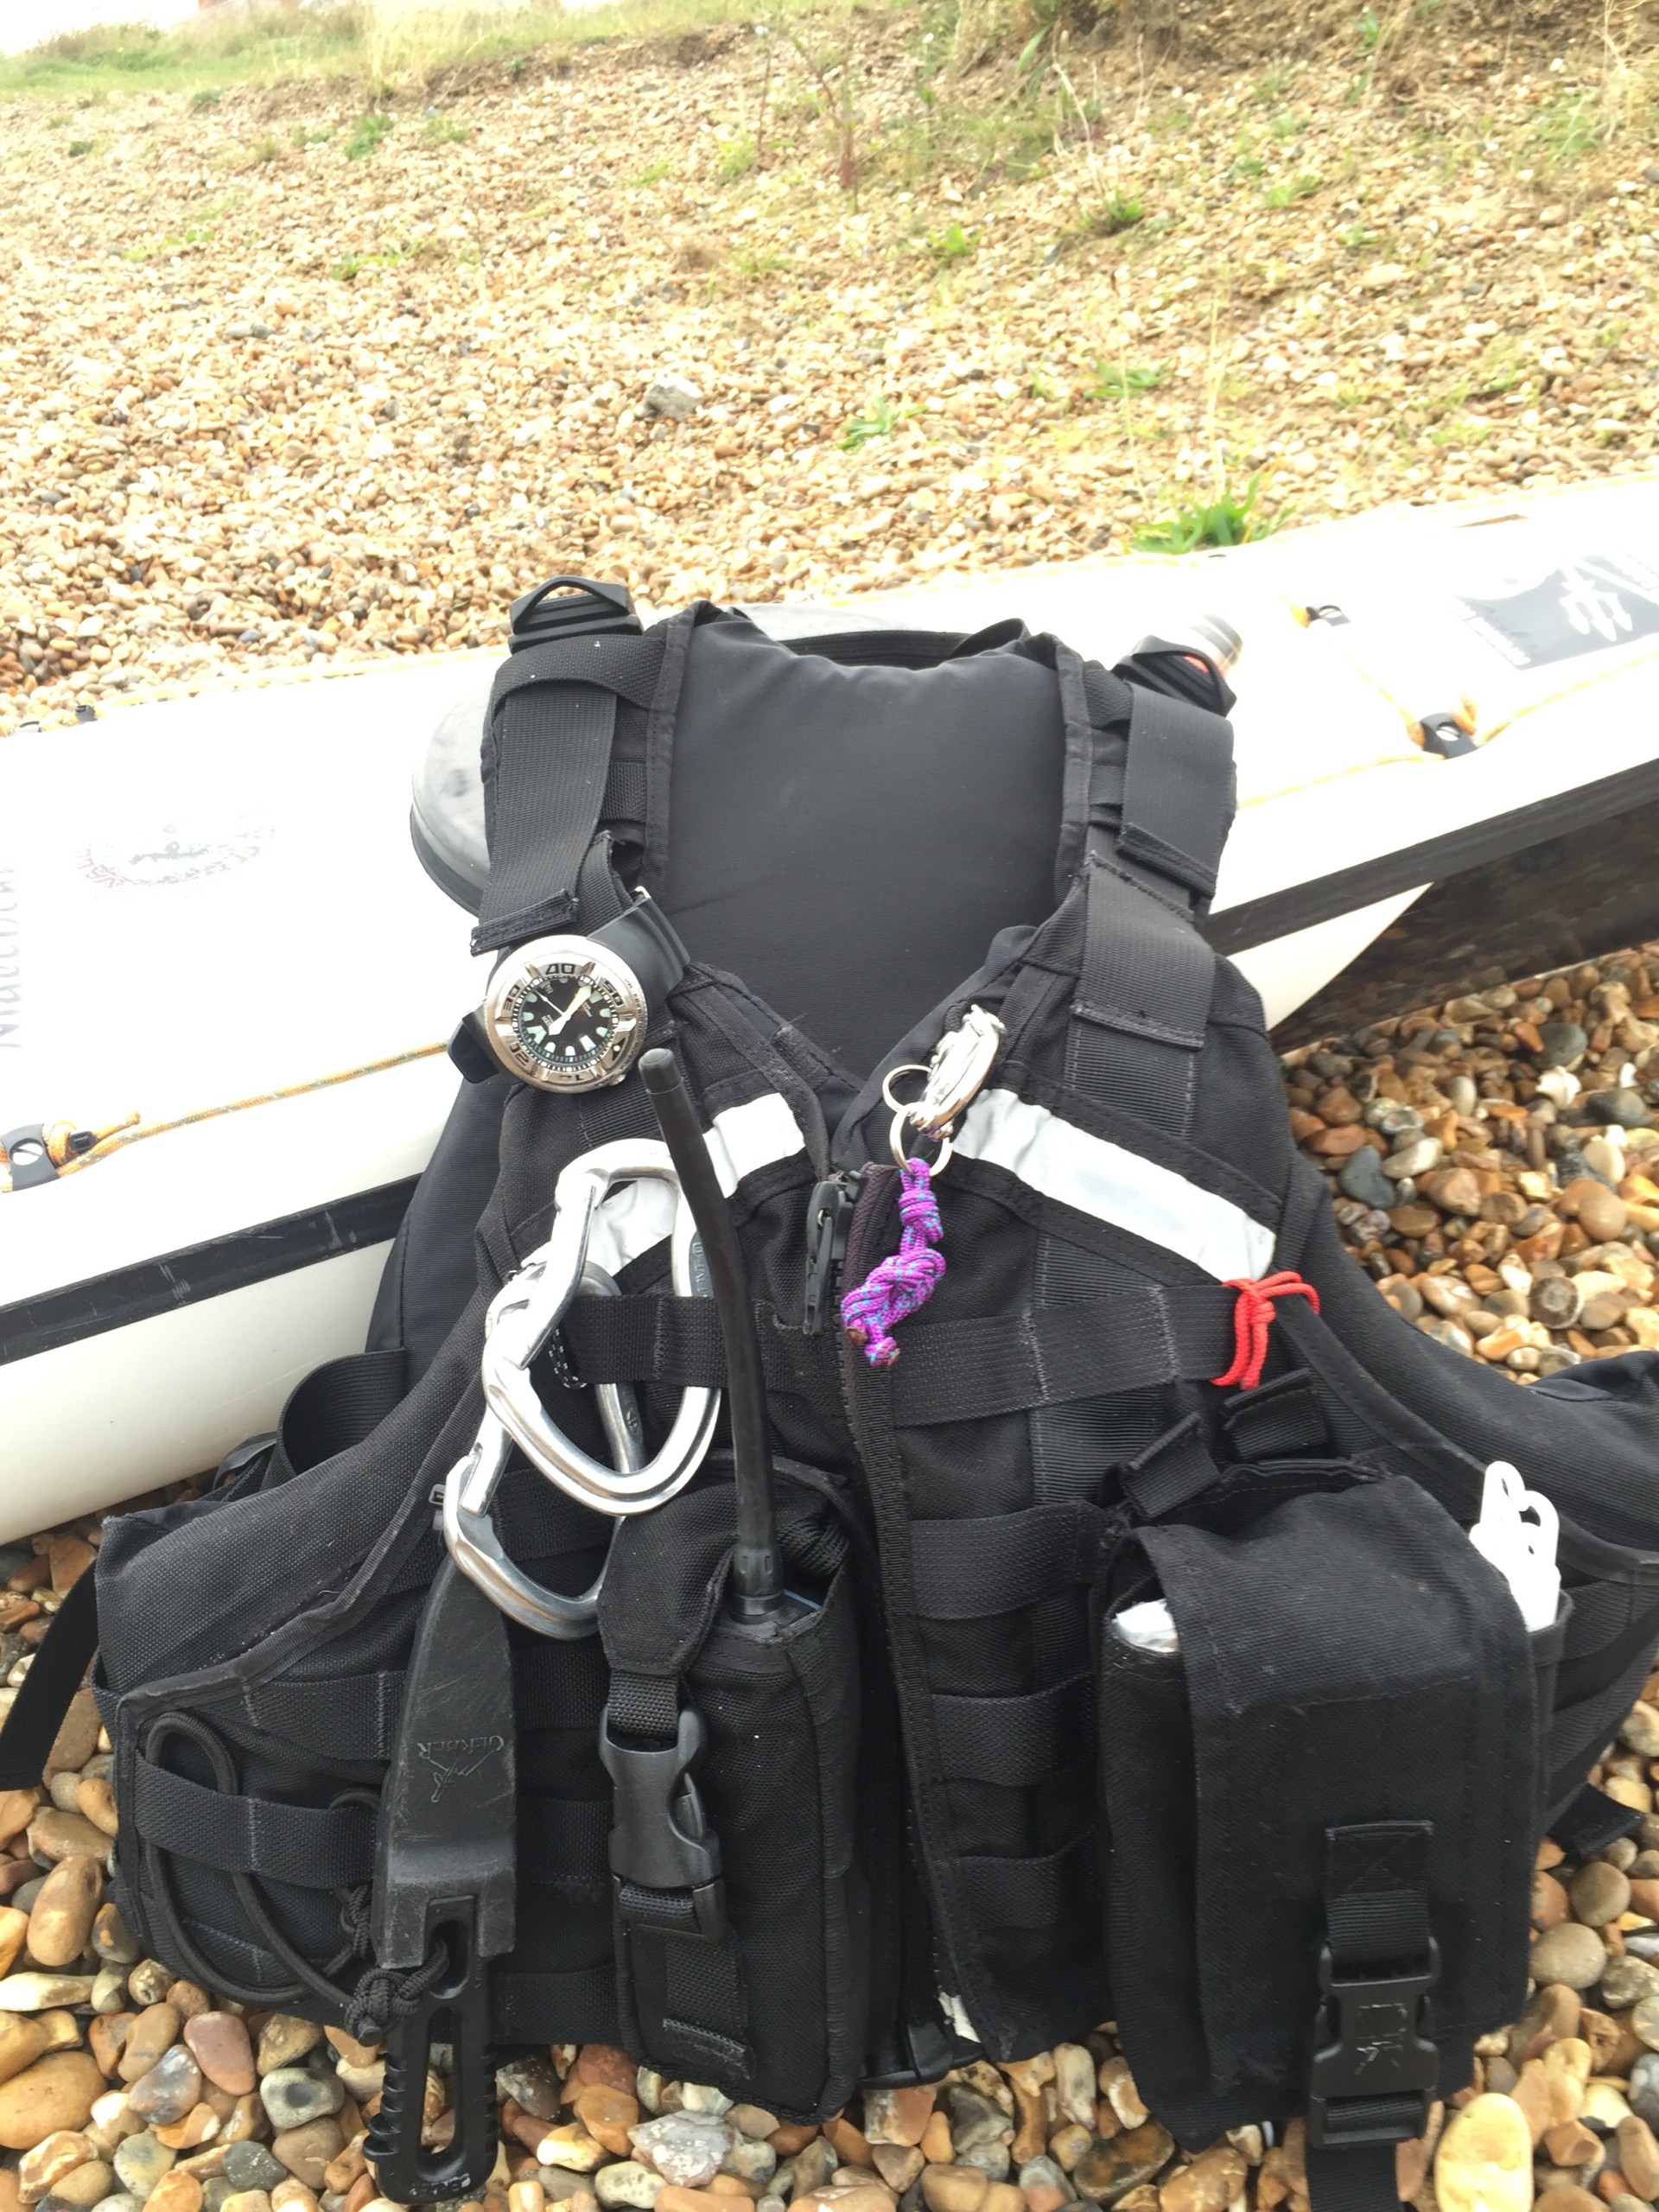 A well provisioned buoyancy aid for sea kayakers with NOMAD Sea Kayaking.